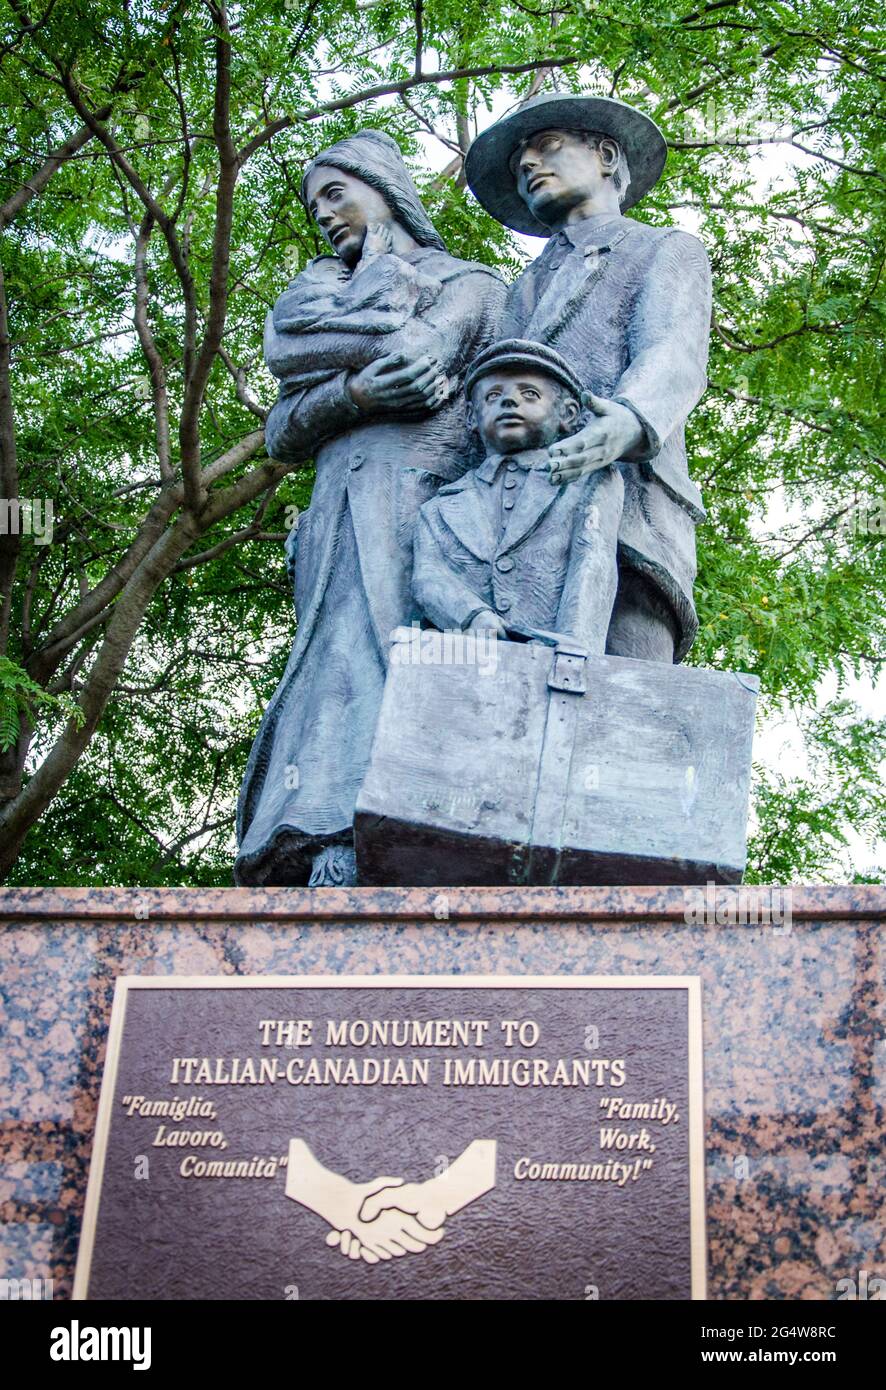 The Monument to Italian-Canadian Immigrants exemplifies the motto of ìFamily, Work, Community!î inscribed on the pedestal of the statue. The monument Stock Photo